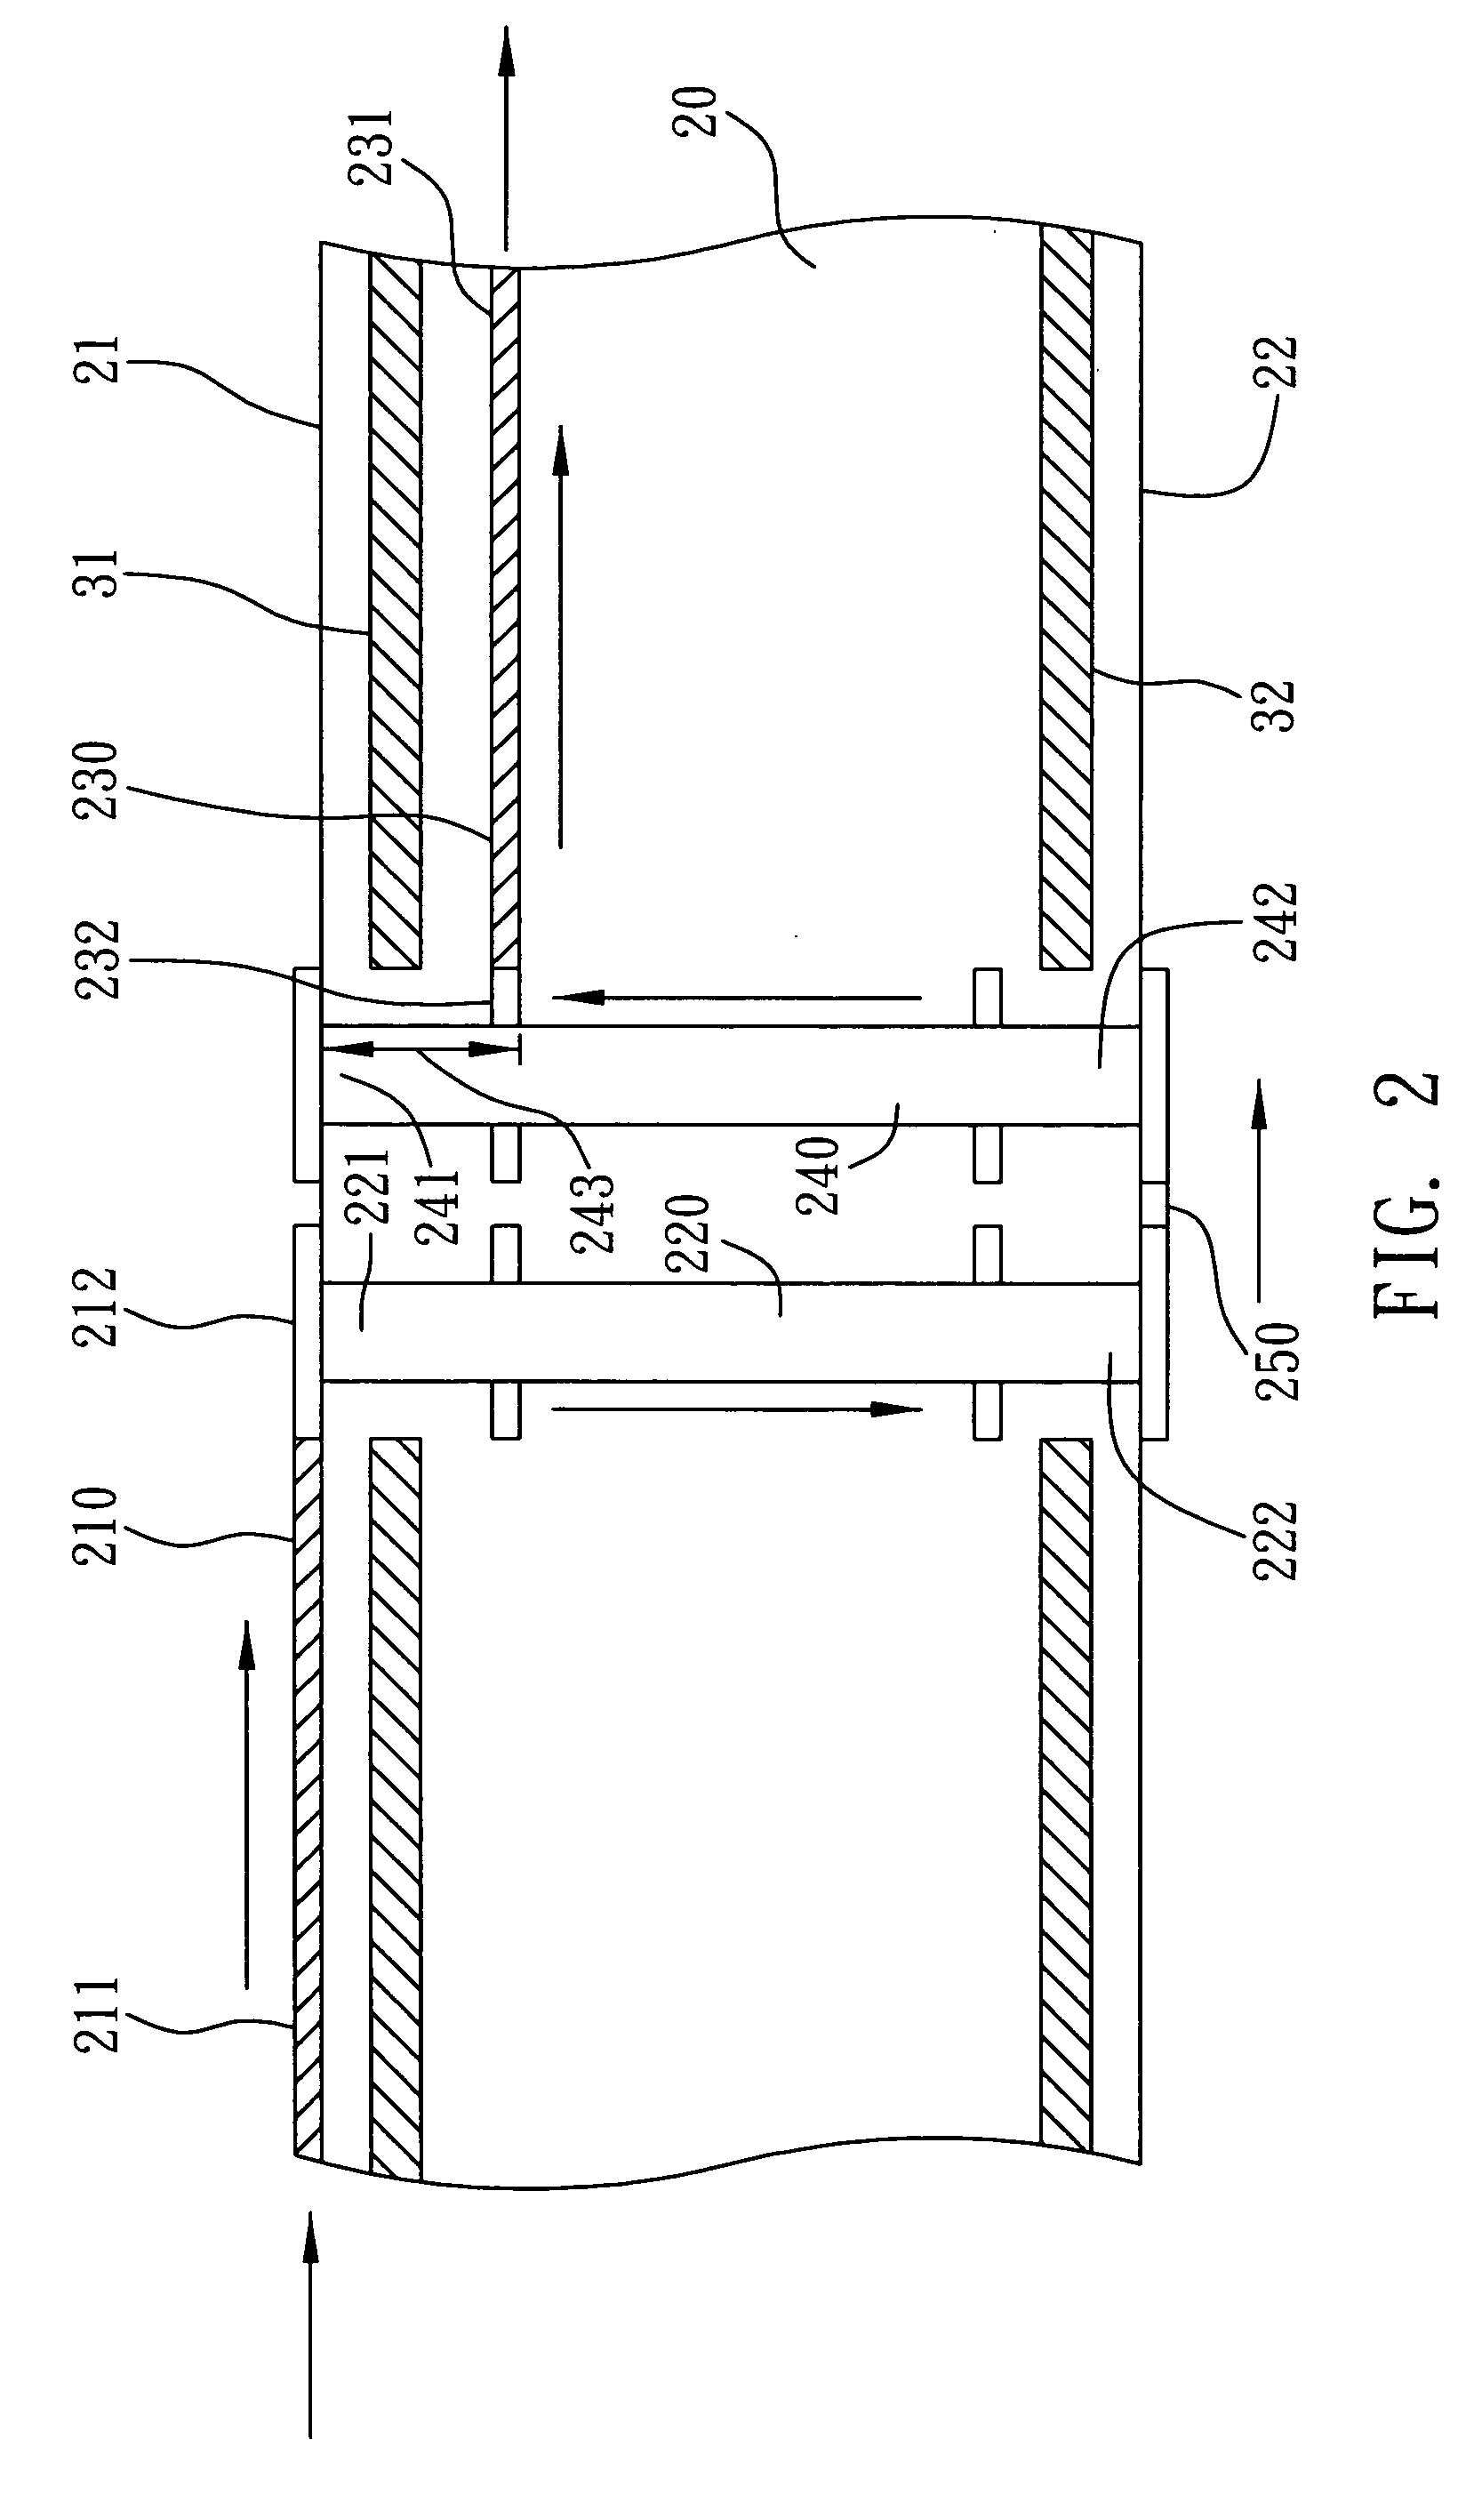 High-speed signal transmission structure having parallel disposed and serially connected vias